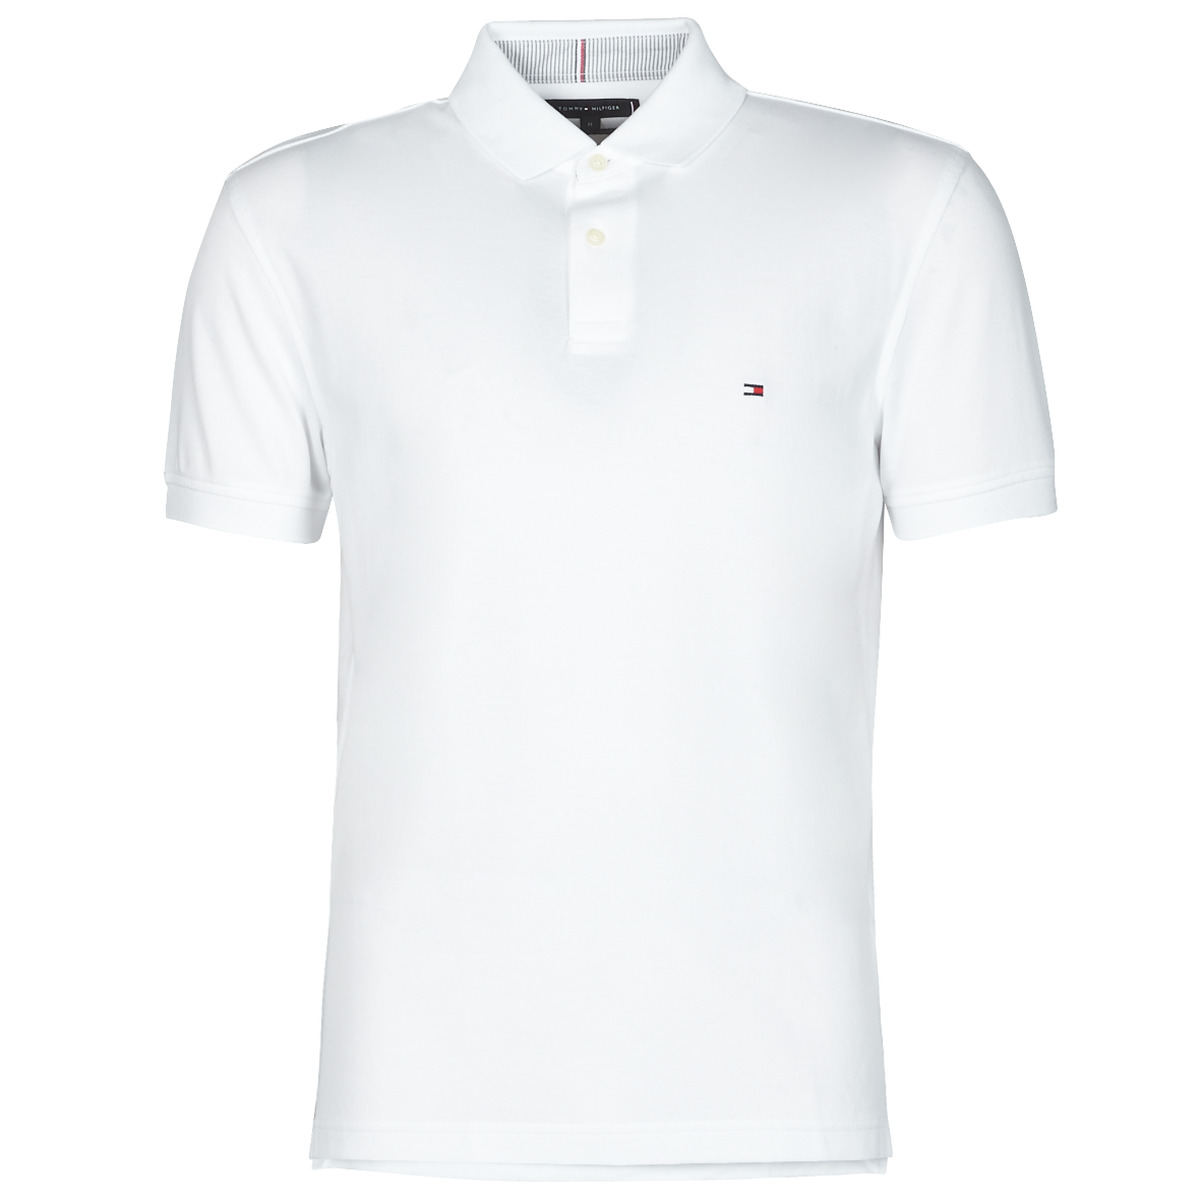 Tommy Hilfiger 1985 REGULAR POLO White - Free delivery | Spartoo NET ! -  Clothing short-sleeved polo shirts Men